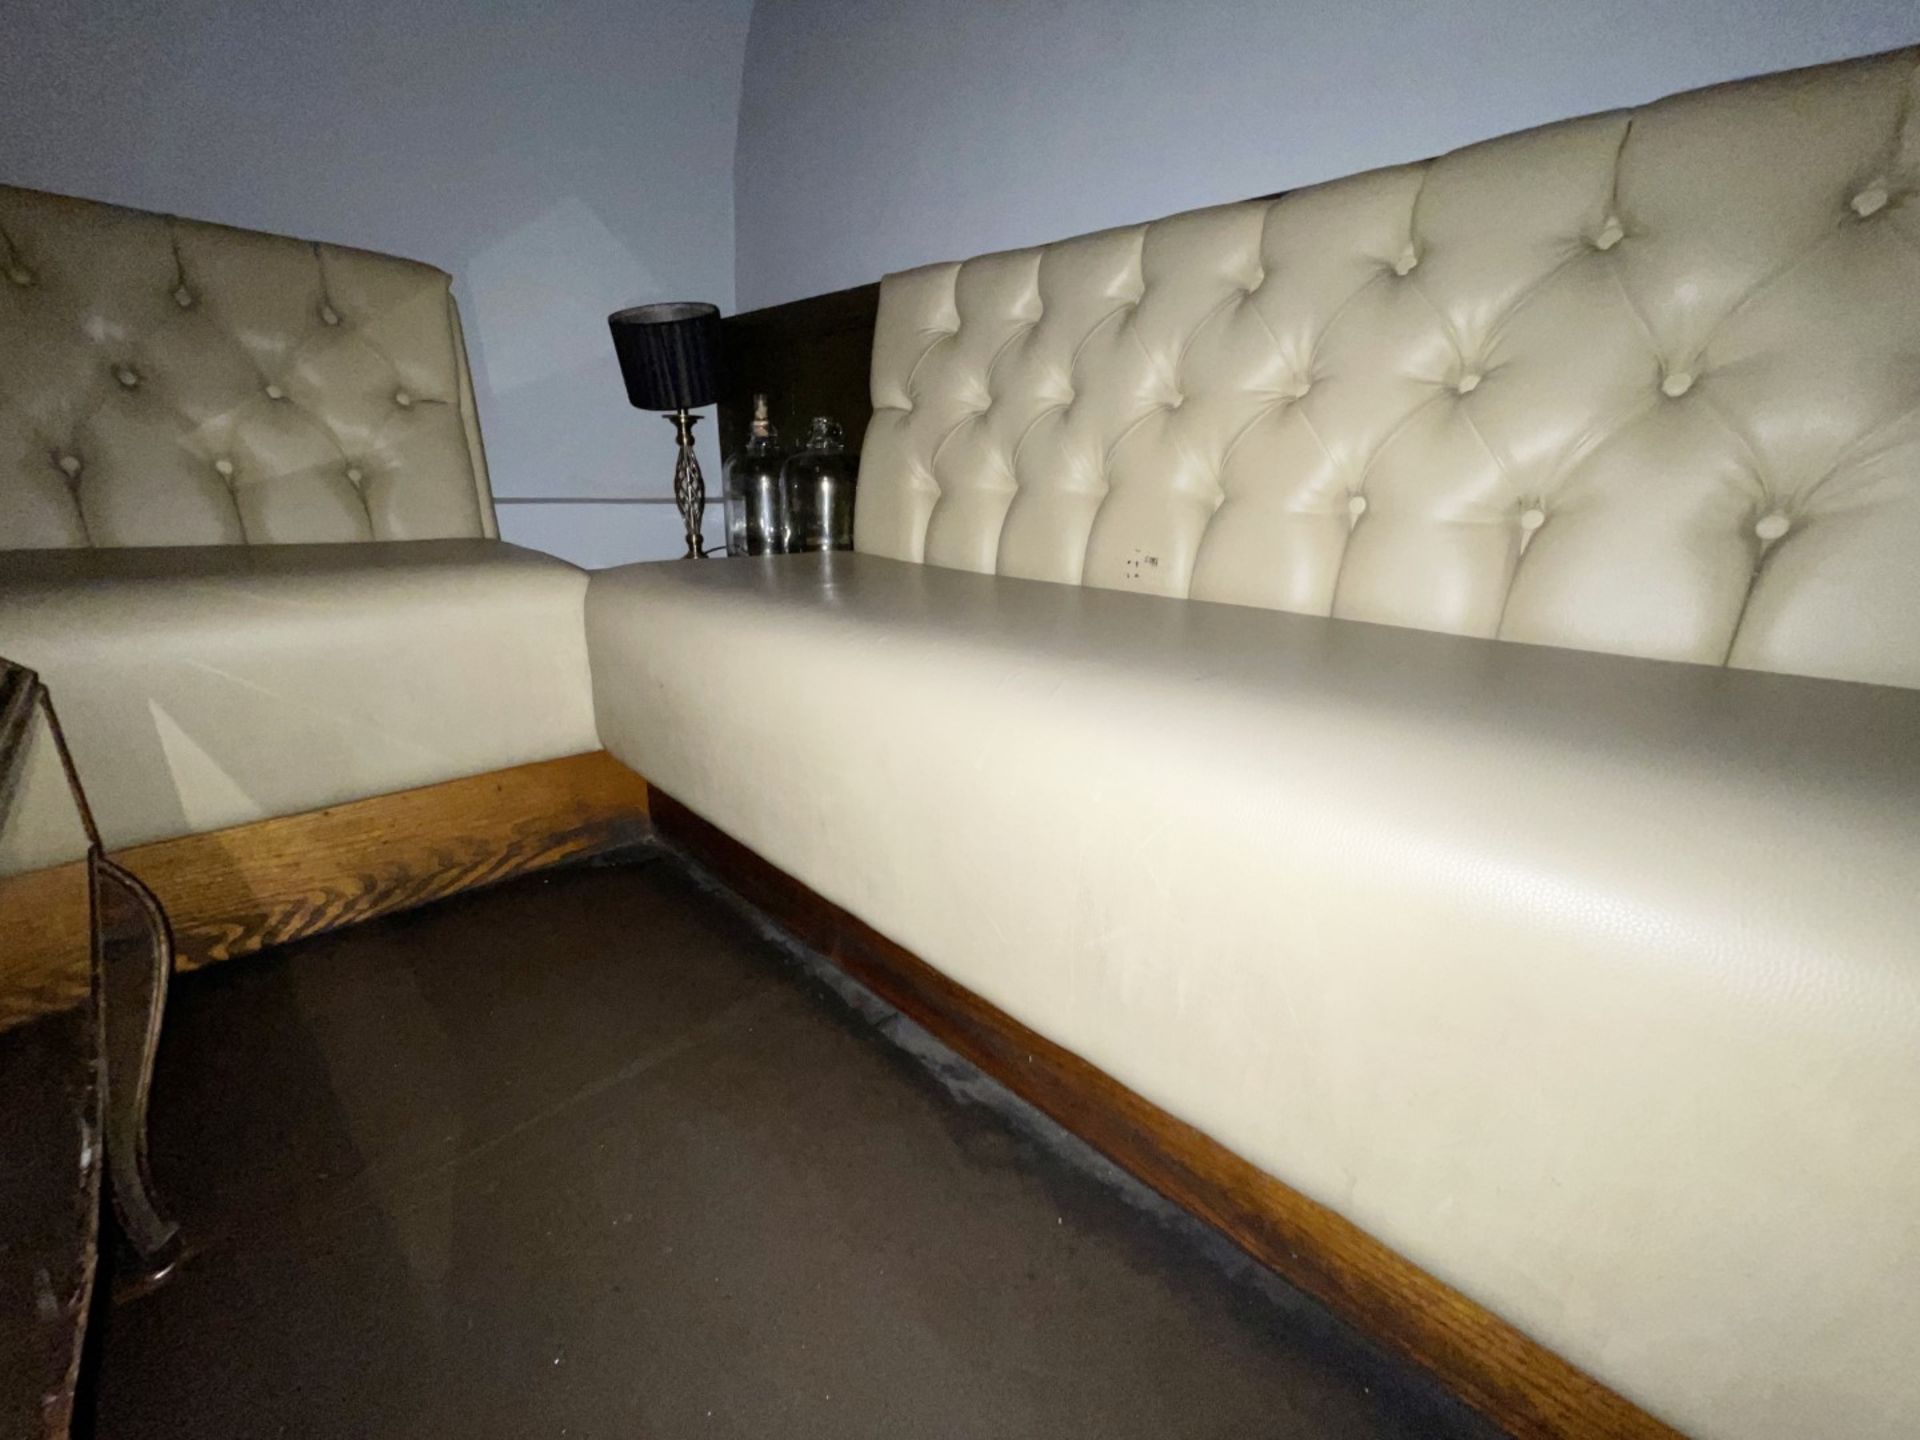 5 x Sections of Commercial Button Back Banquette Booth Seating Upholstered in a Cream Faux Leather - Image 11 of 14